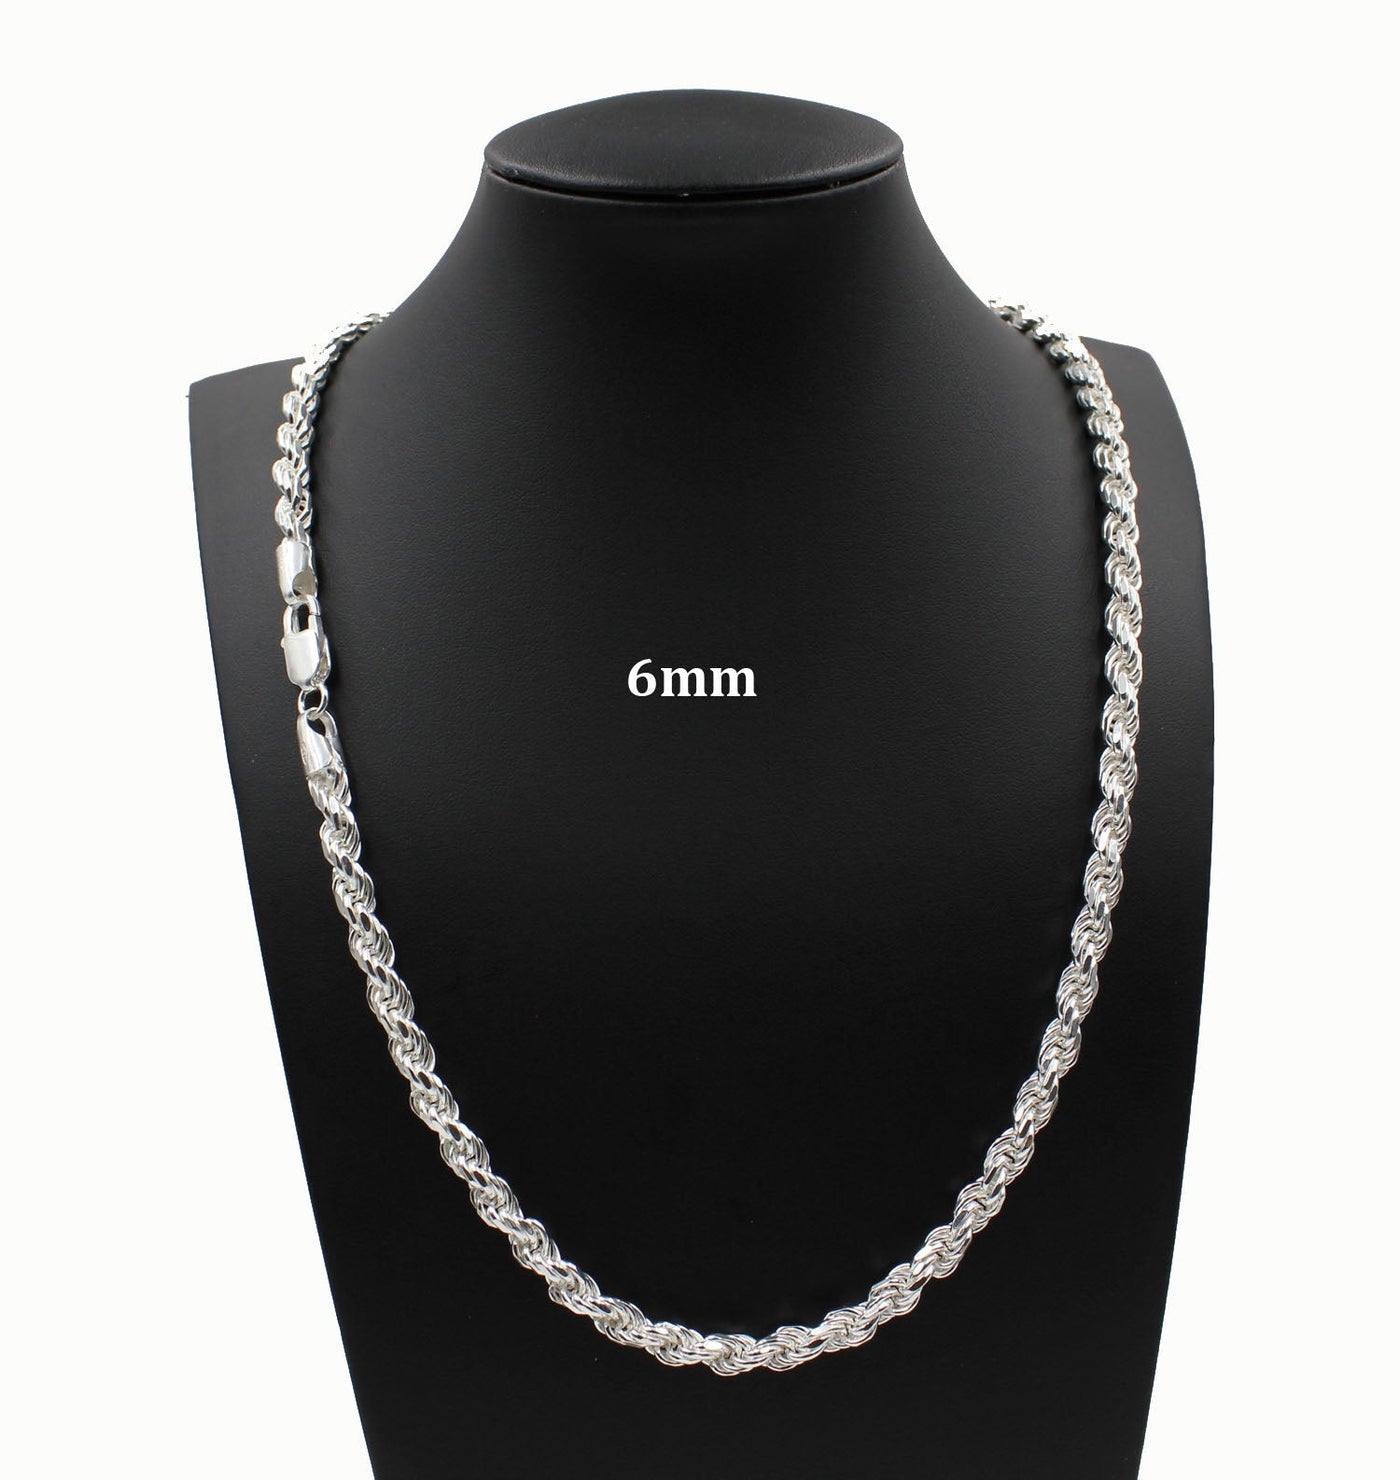 6MM Solid 925 Sterling Silver DIAMOND CUT ROPE CHAIN Necklace ITALY Men Women